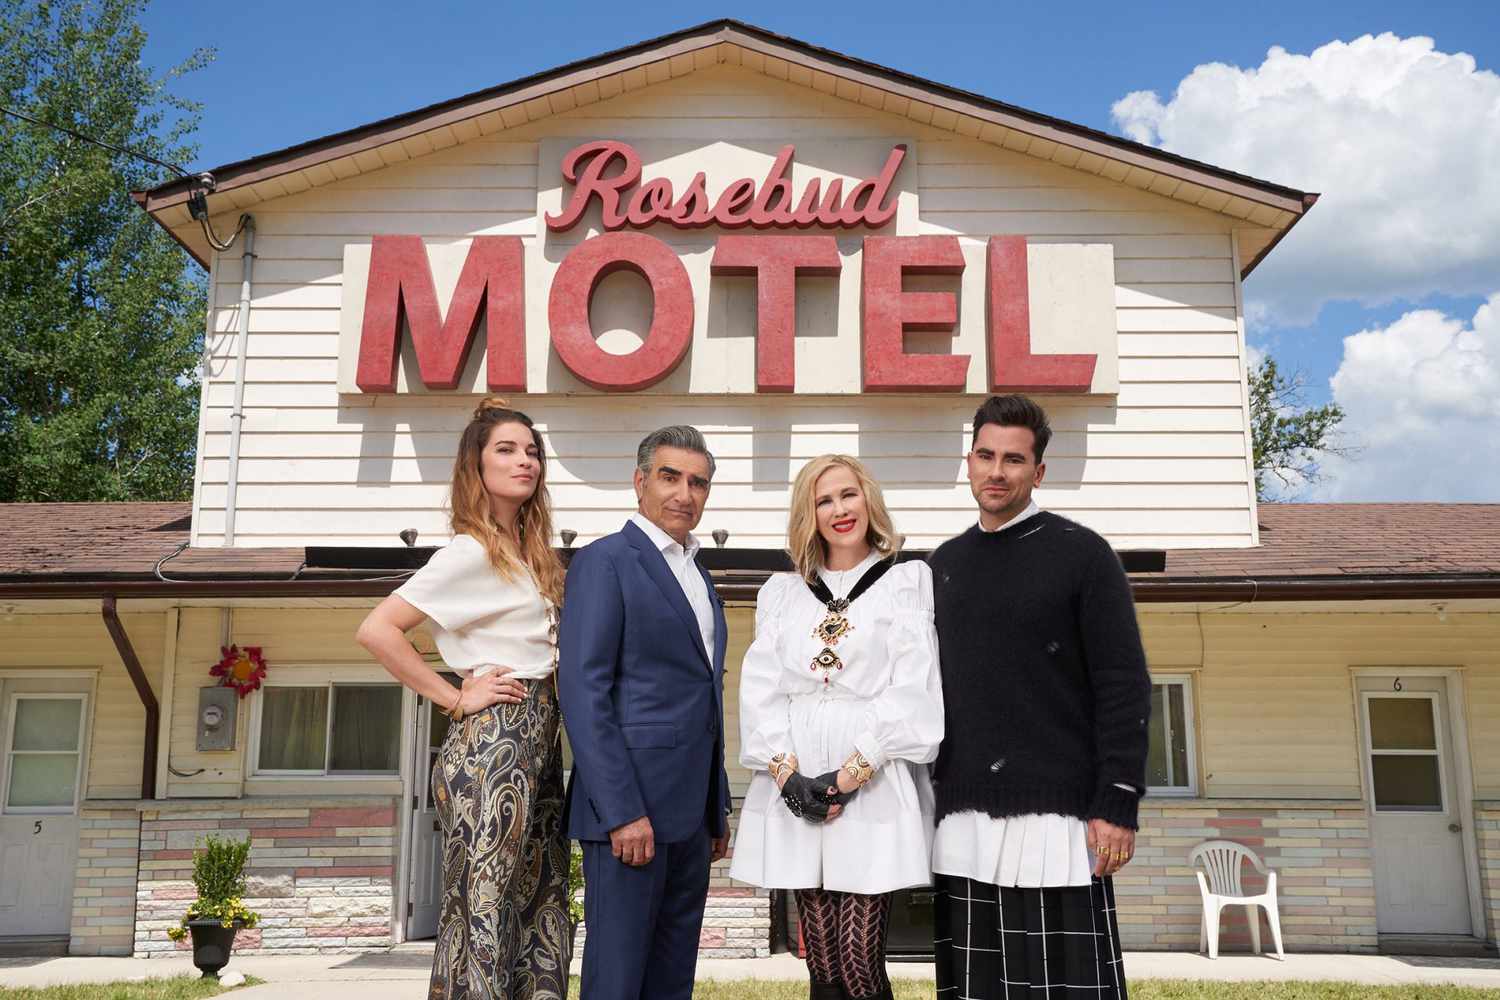 The Rosebud Motel From Schitt's Creek Will Soon Be for Sale | PEOPLE.com